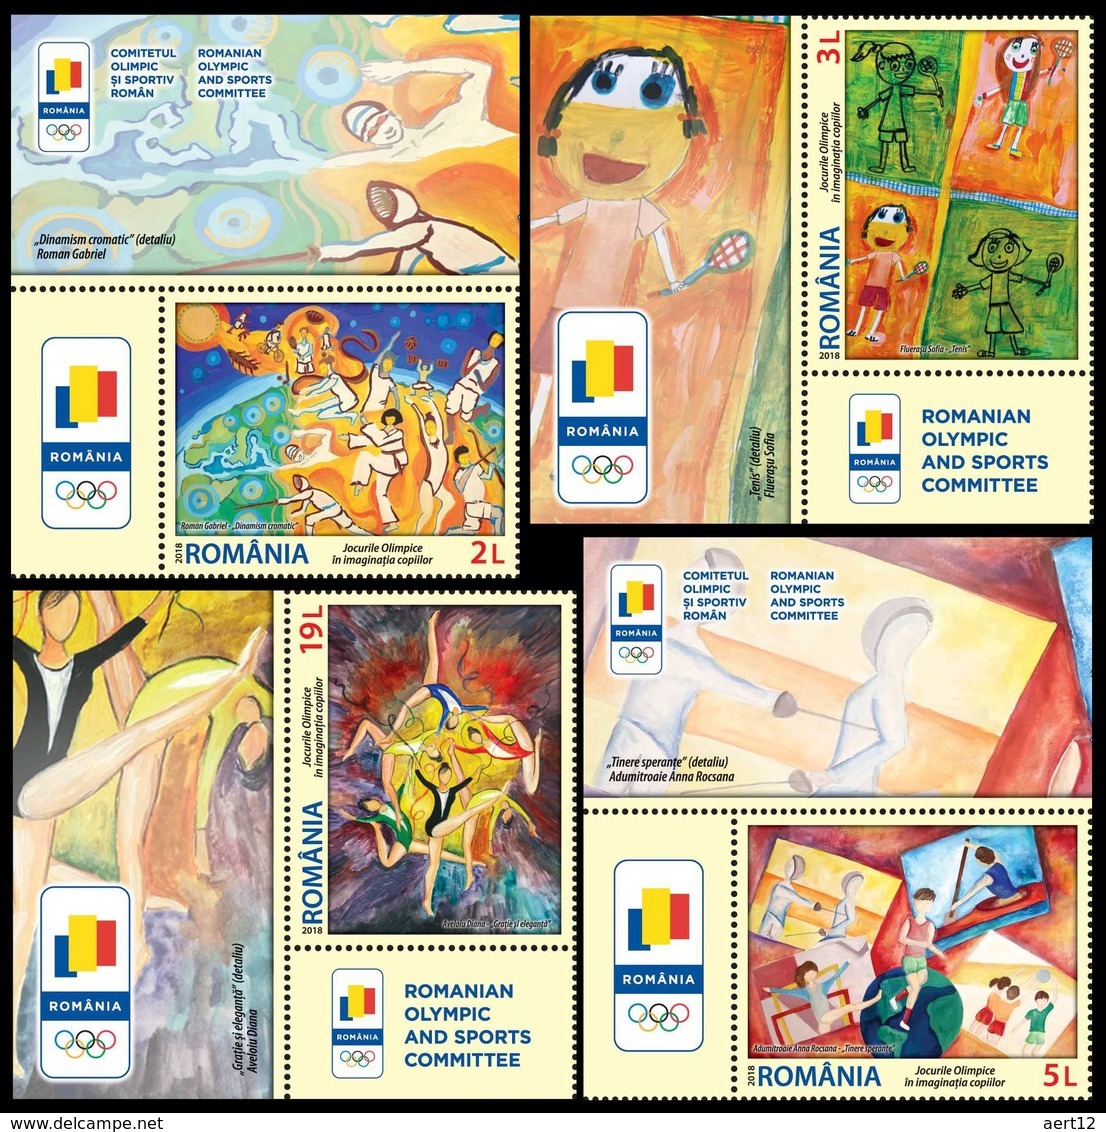 ROMANIA, 2018, OLYMPIC GAMES IN CHILDRENS IMAGINATION, Painting, Set Of 4 Stamp + Tab, MNH (**); LPMP 2210 - Unused Stamps